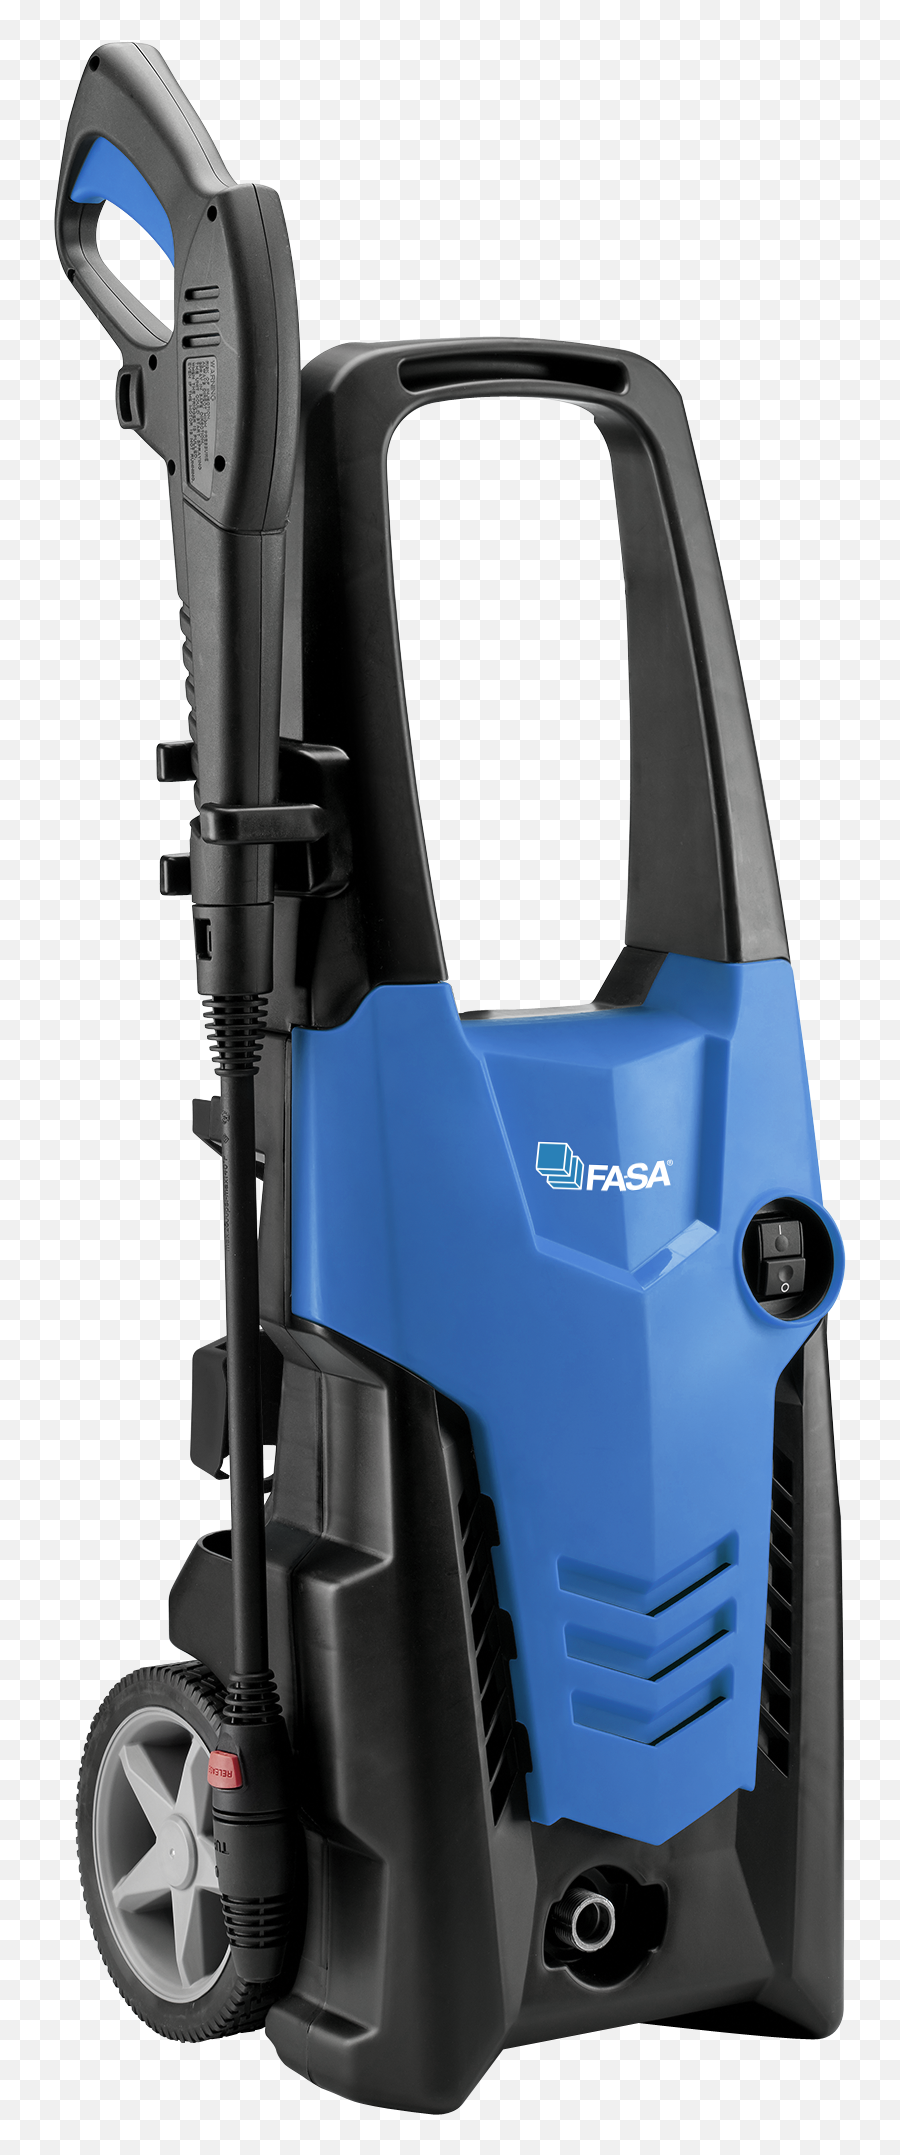 Fasa Celtic 20 - Fasa Pressure Washer Png,Celtic Png